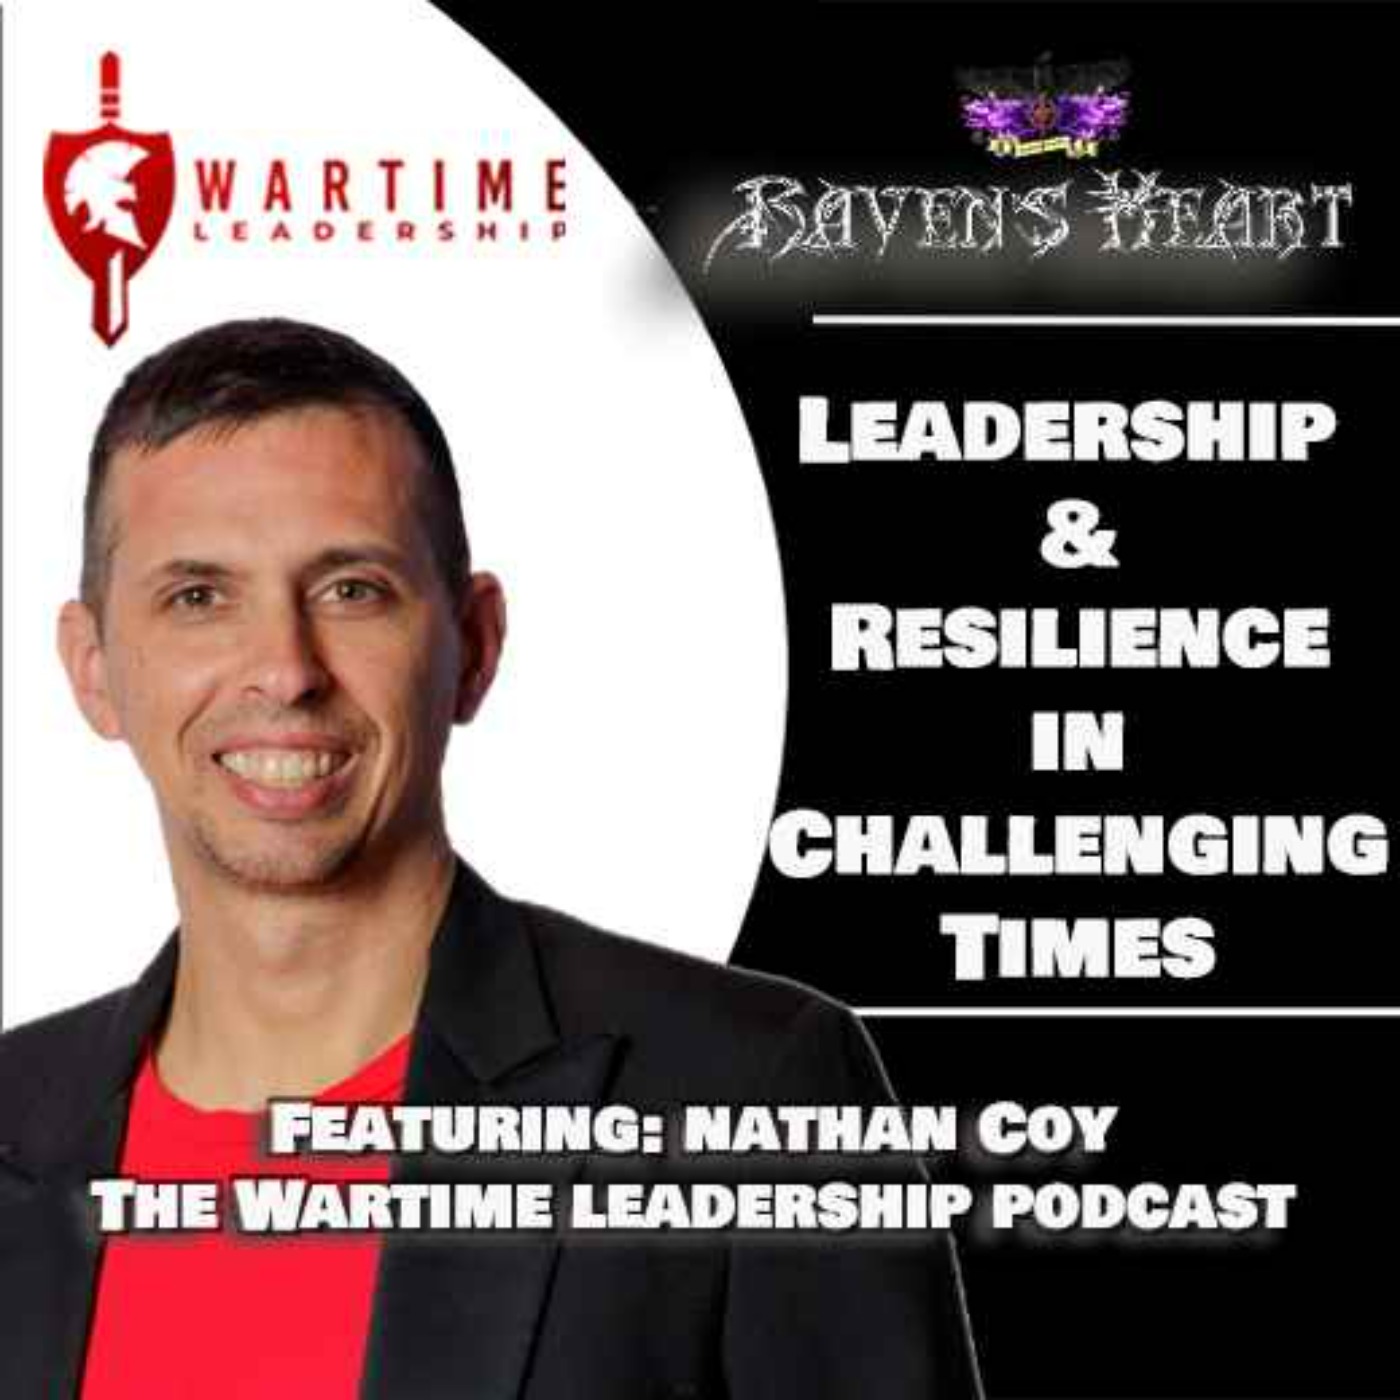 Leadership & Resilience in Challenging Times